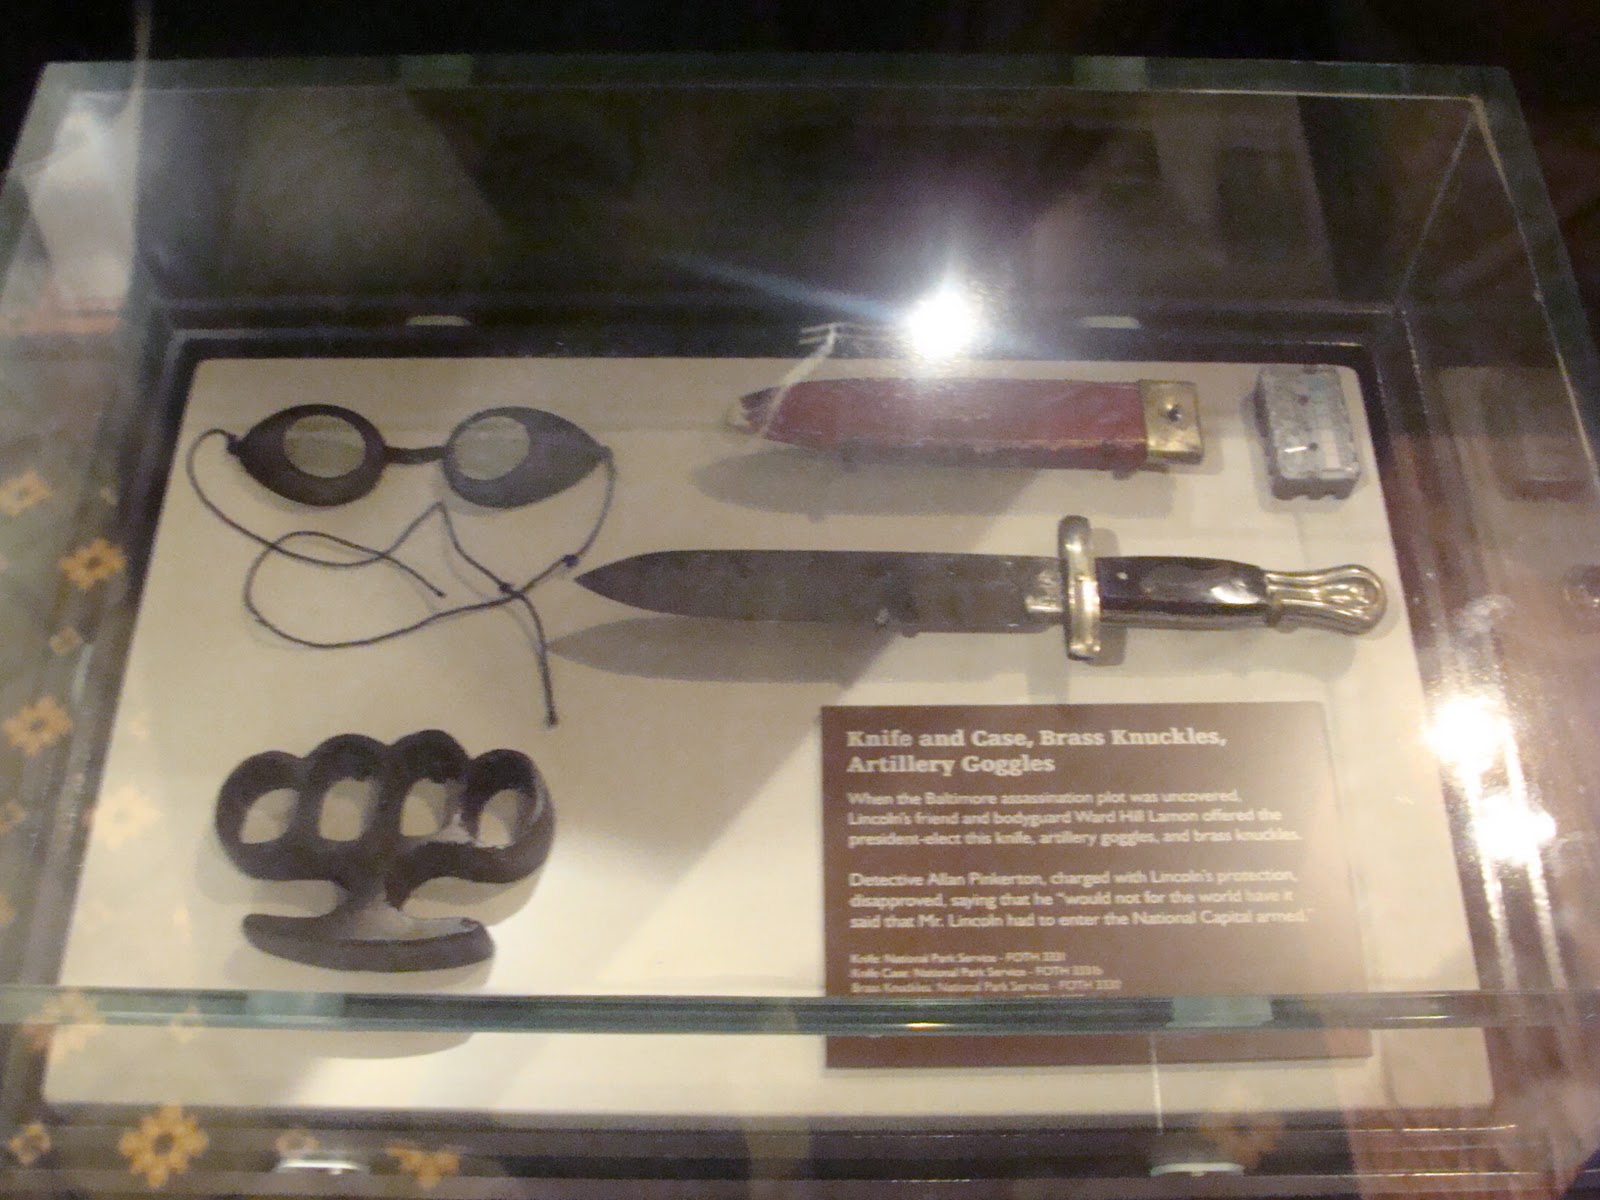 Abraham Lincoln's Brass Knuckles